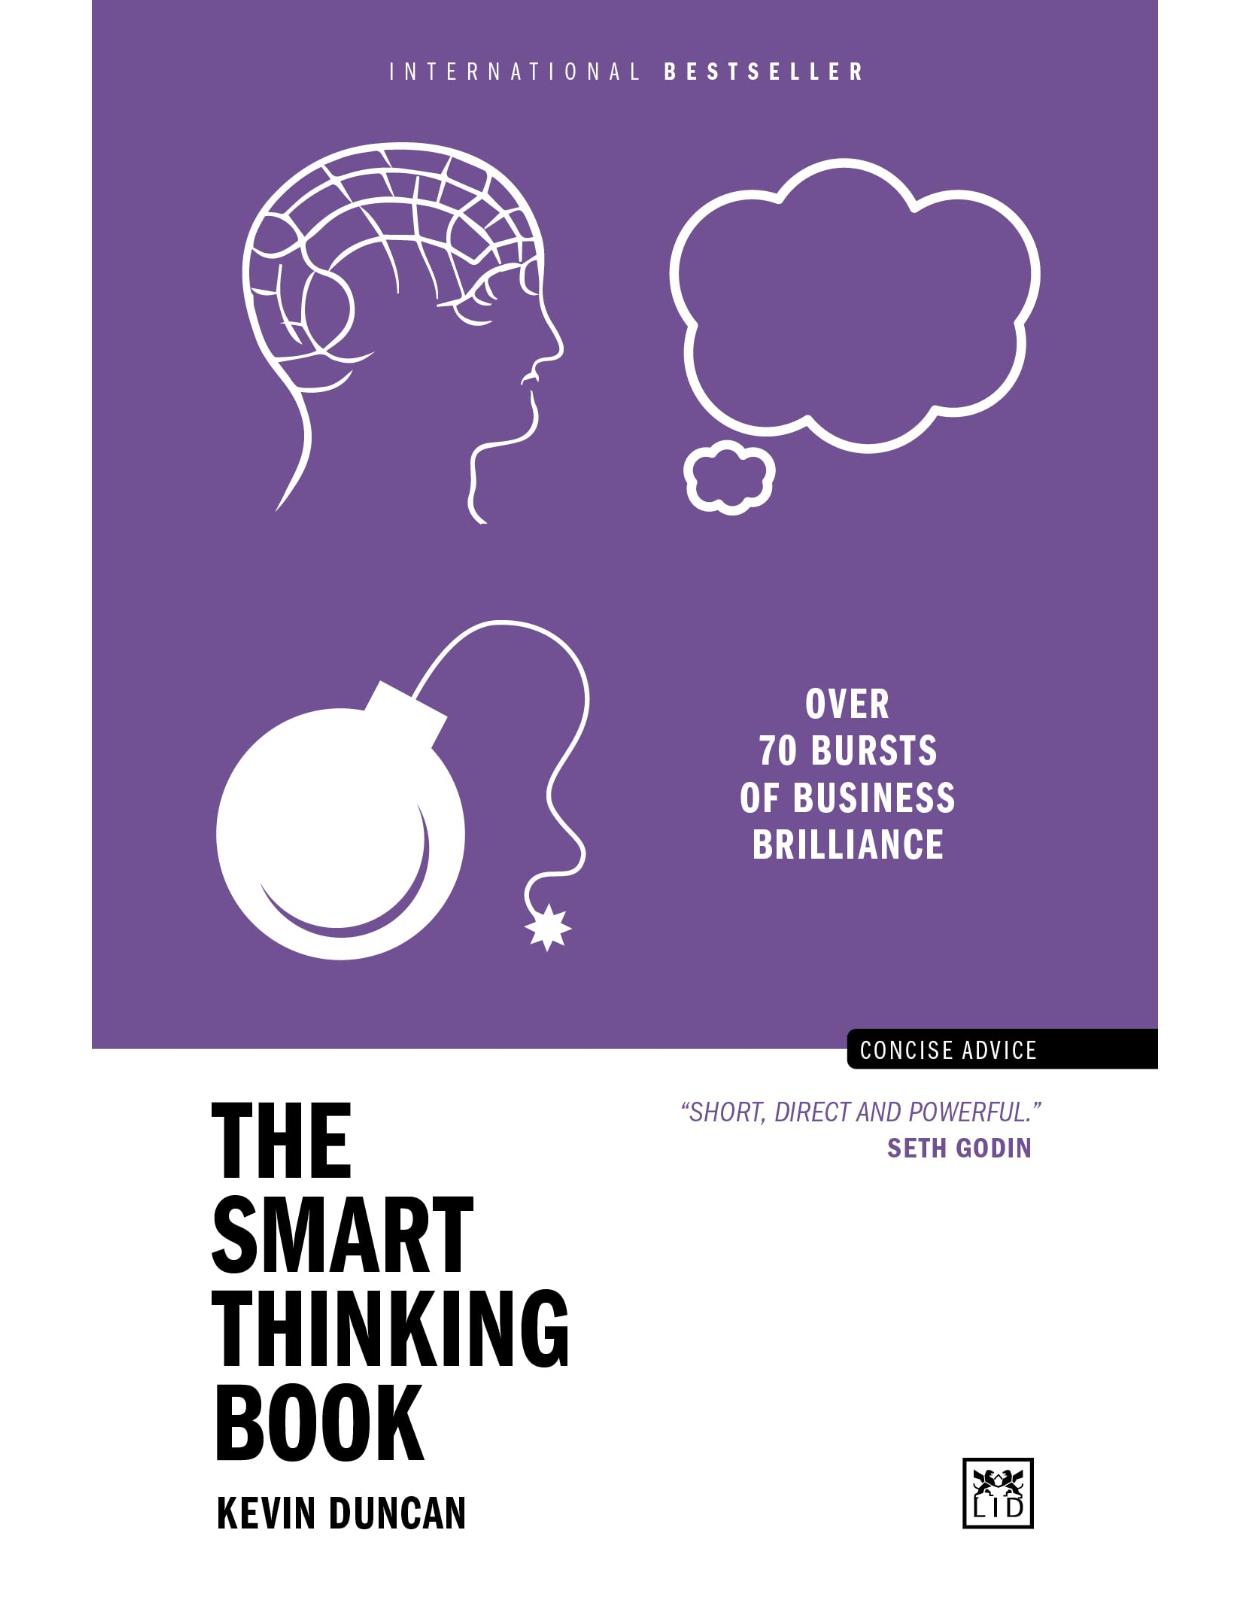 The Smart Thinking Book: Over 70 bursts of business brilliance